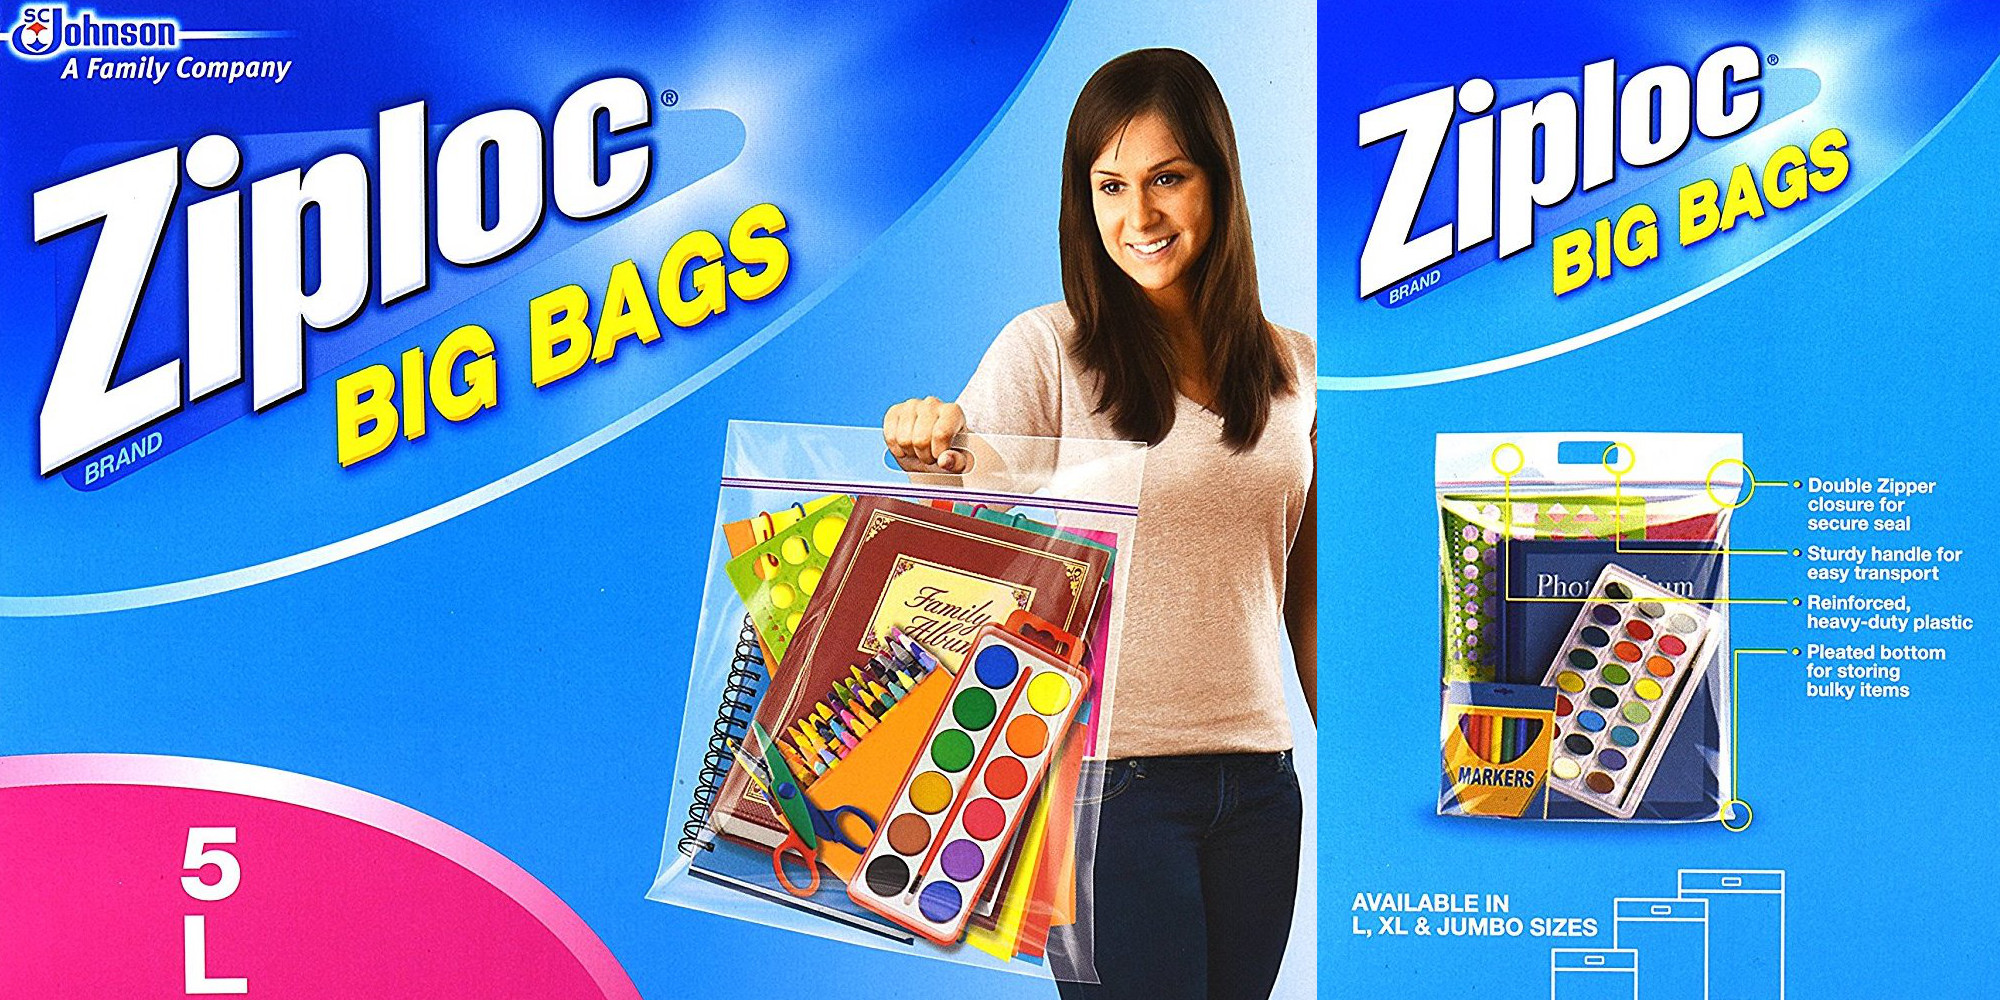 Get a 5-pack of giant Double Zipper Ziploc Bags to keep things